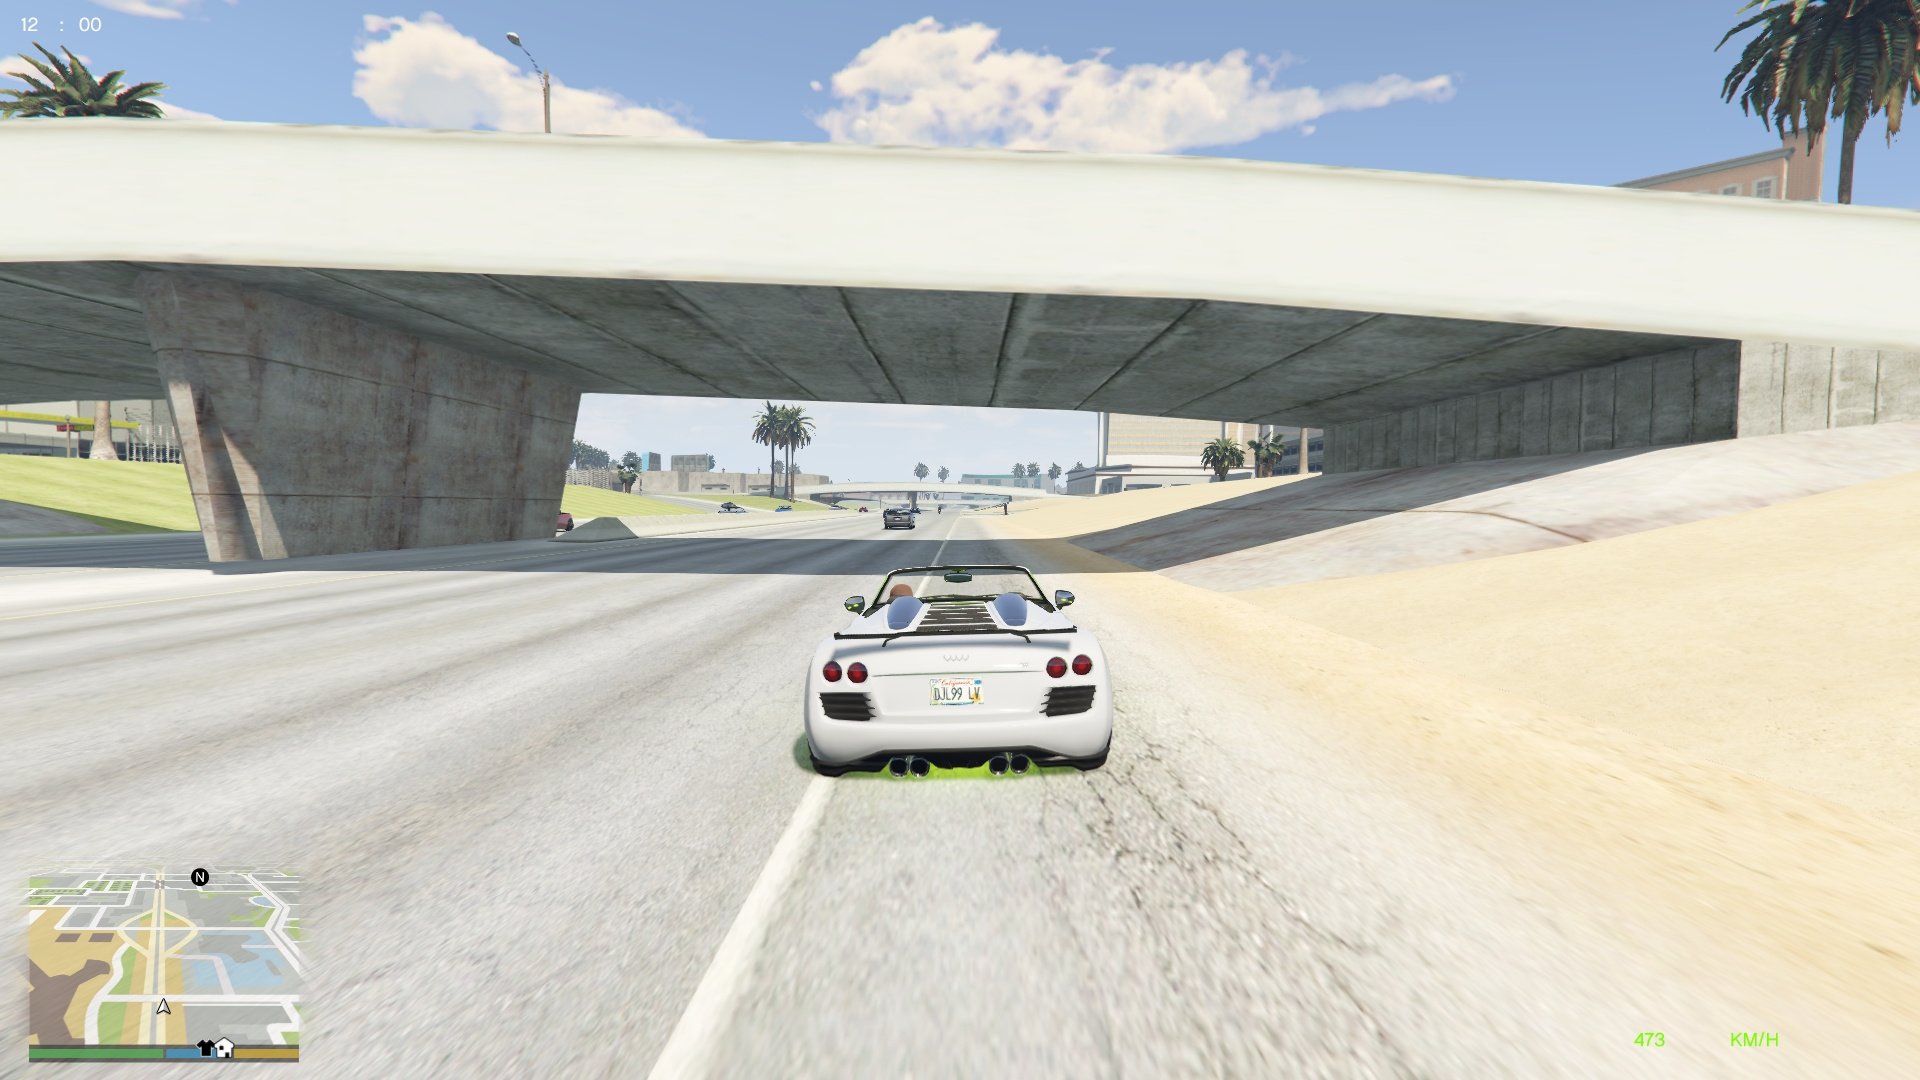 Racing Style Map 16k (N.F.S., Forza Horizon, The Crew, etc.) with